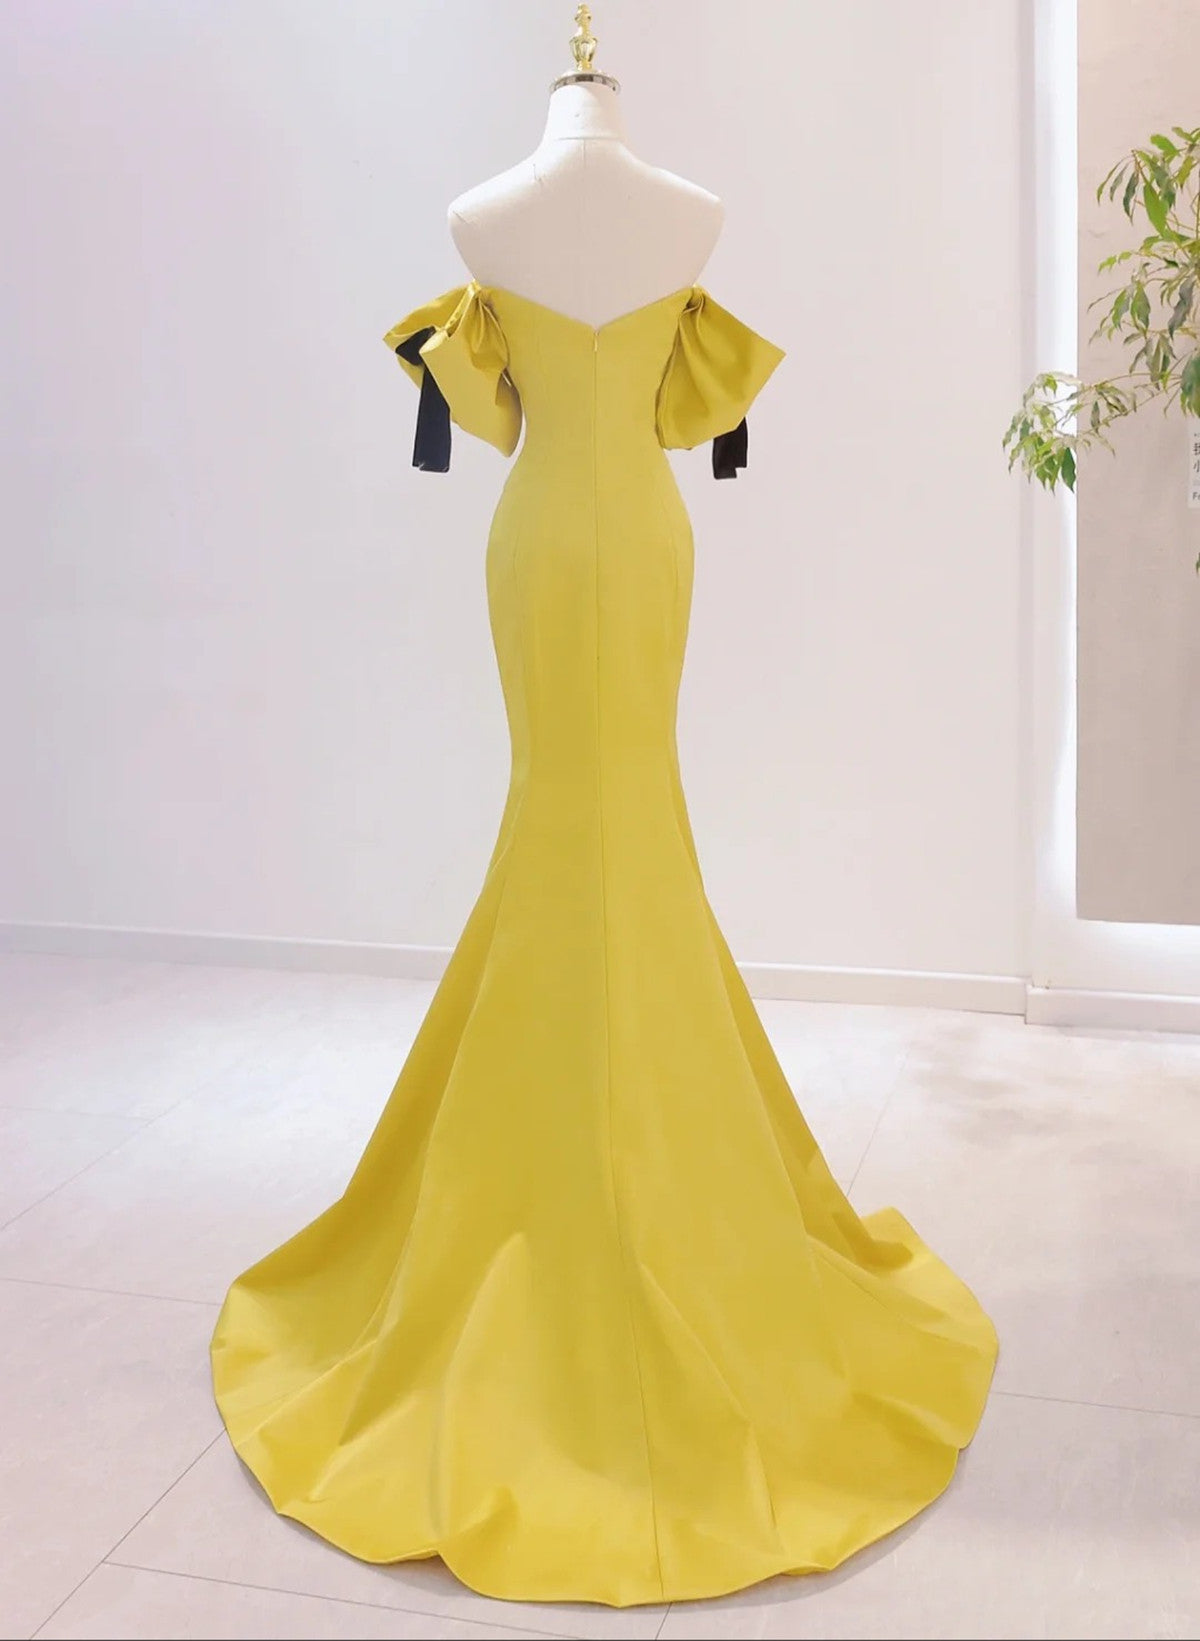 LOVECCRYellow Mermaid Sweetheart Prom Dress, Off Shoulder Yellow Evening Dress